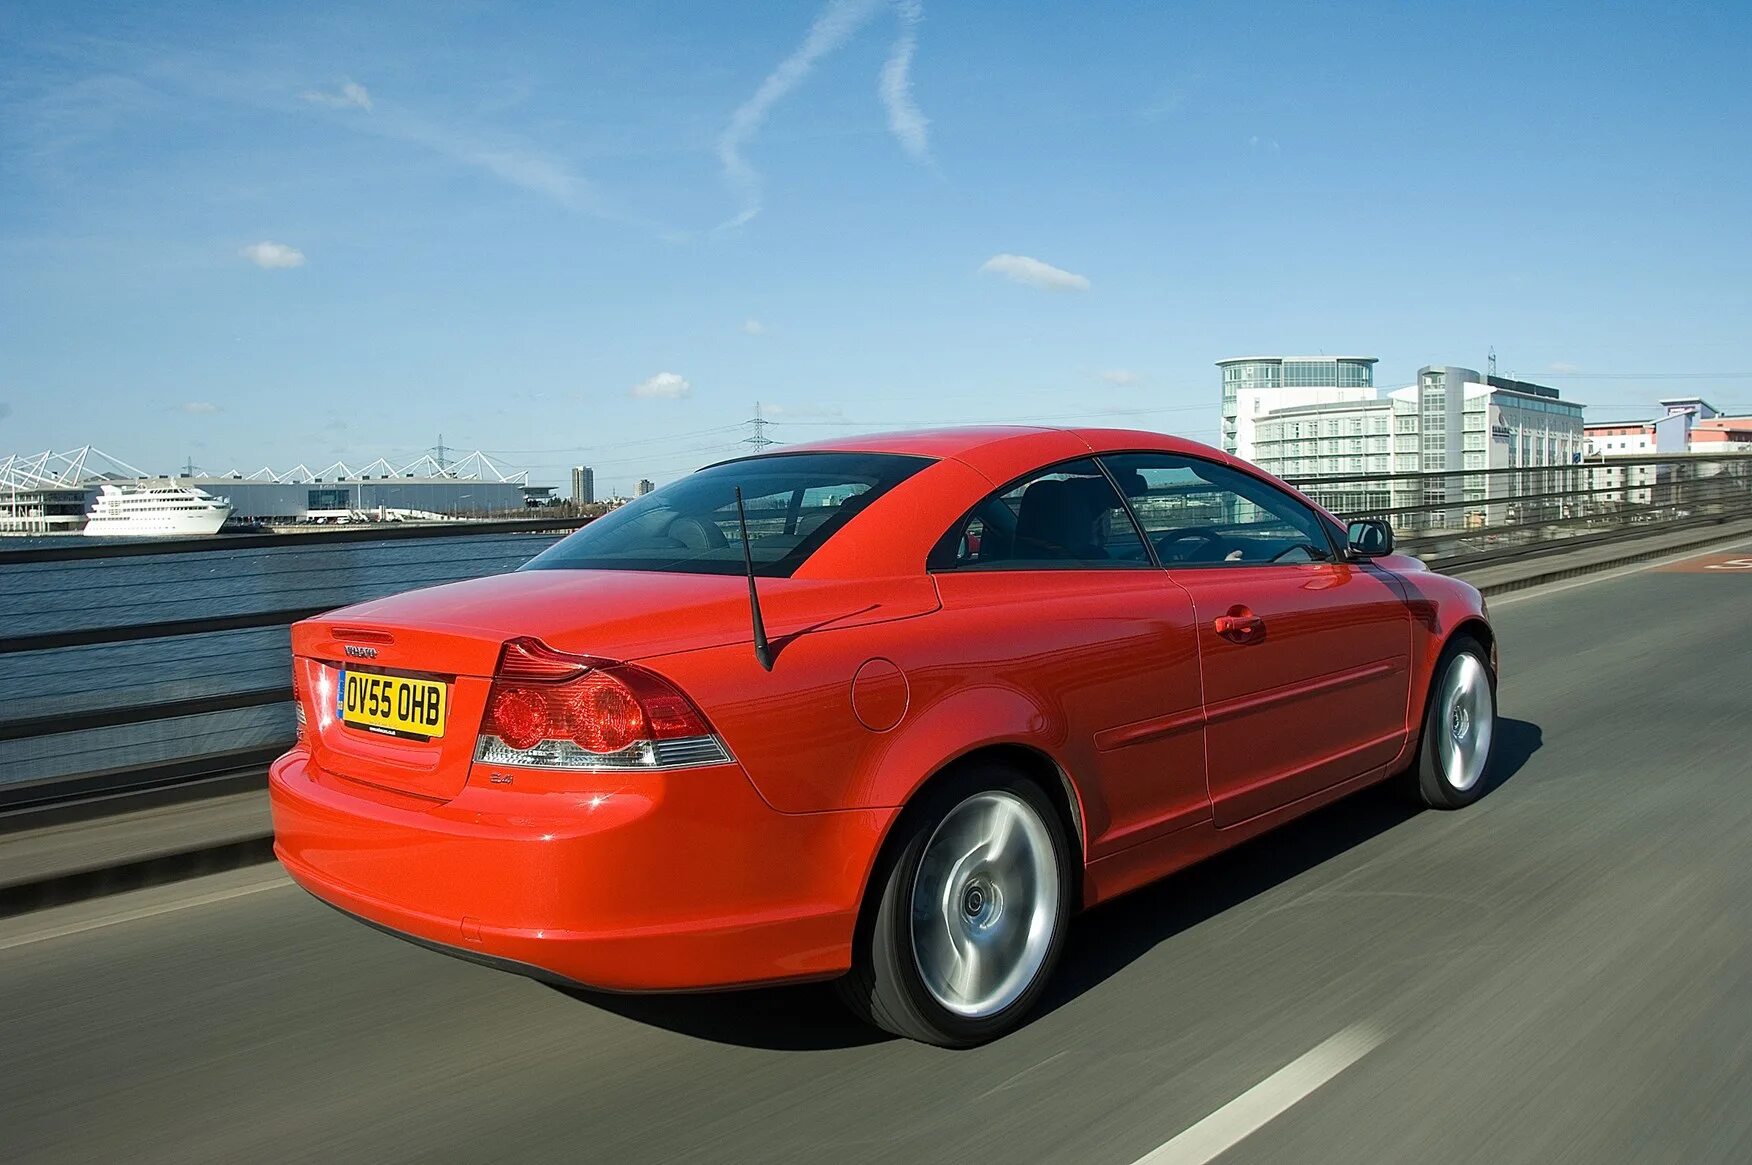 Volvo c70 Coupe Red. Volvo c70 2006. Volvo c70 Coupe красная. Volvo c70 l Coupe Red.